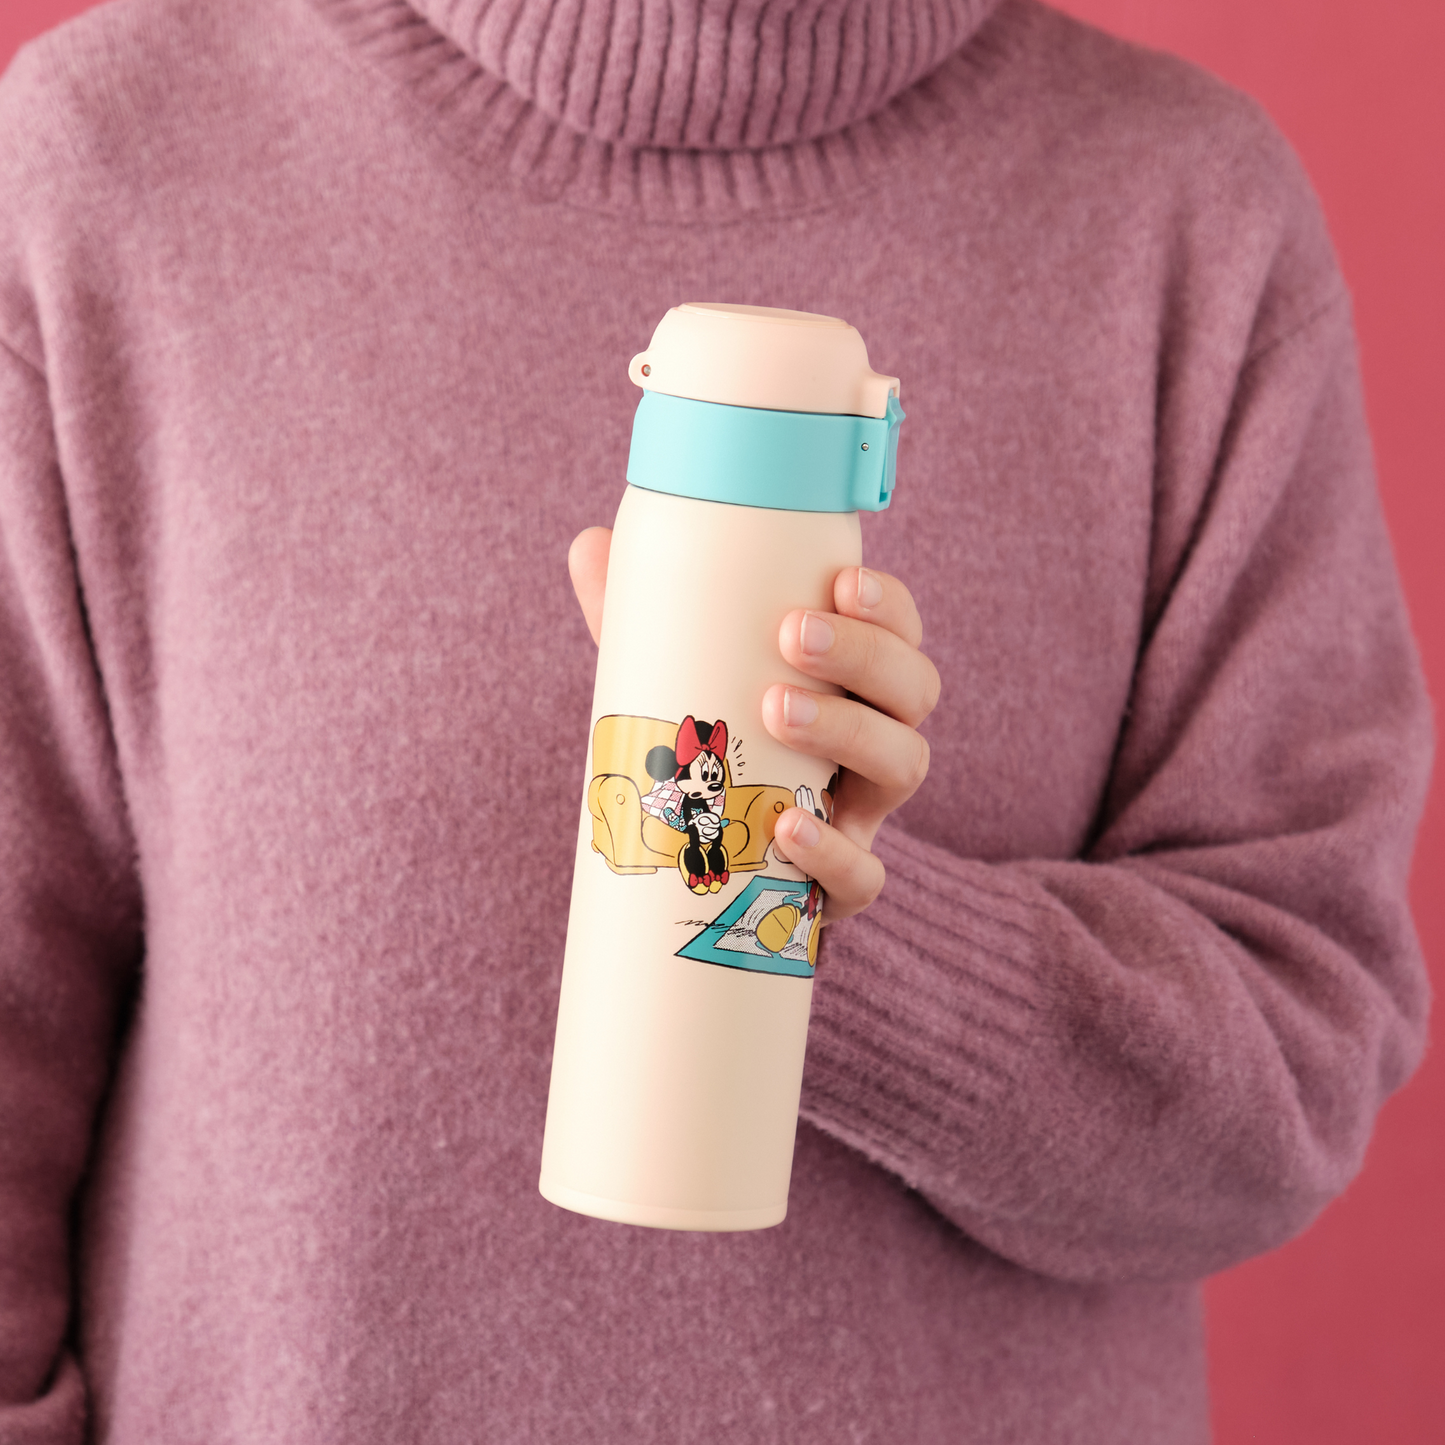 Stainless Steel Bottle | Retro Mickey and Minnie, 480mL